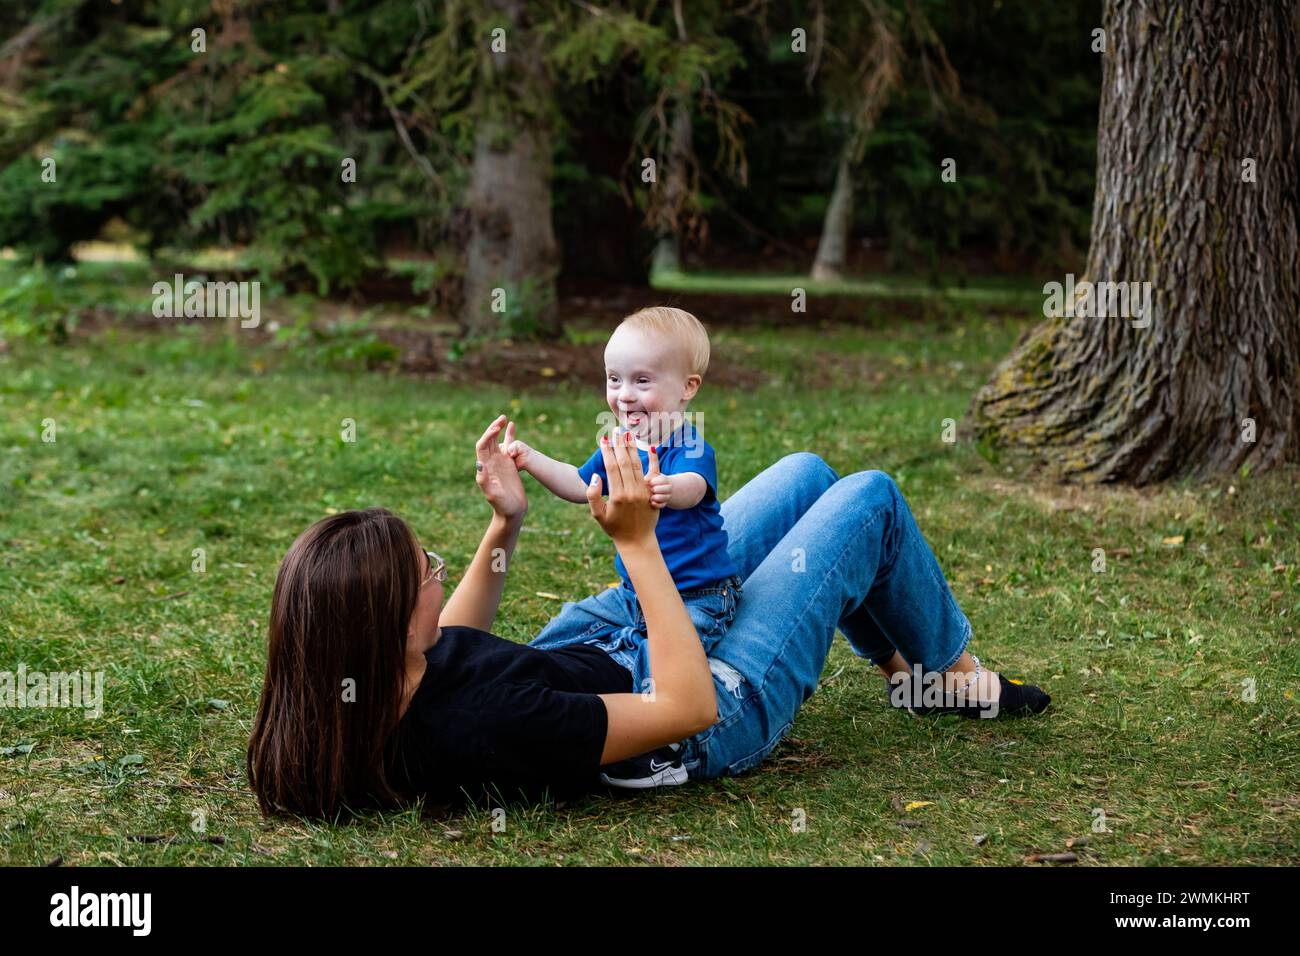 Older sister spending quality time with her young brother who has Down Syndrome, in a city park during a warm fall afternoon; Leduc, Alberta, Canada Stock Photo